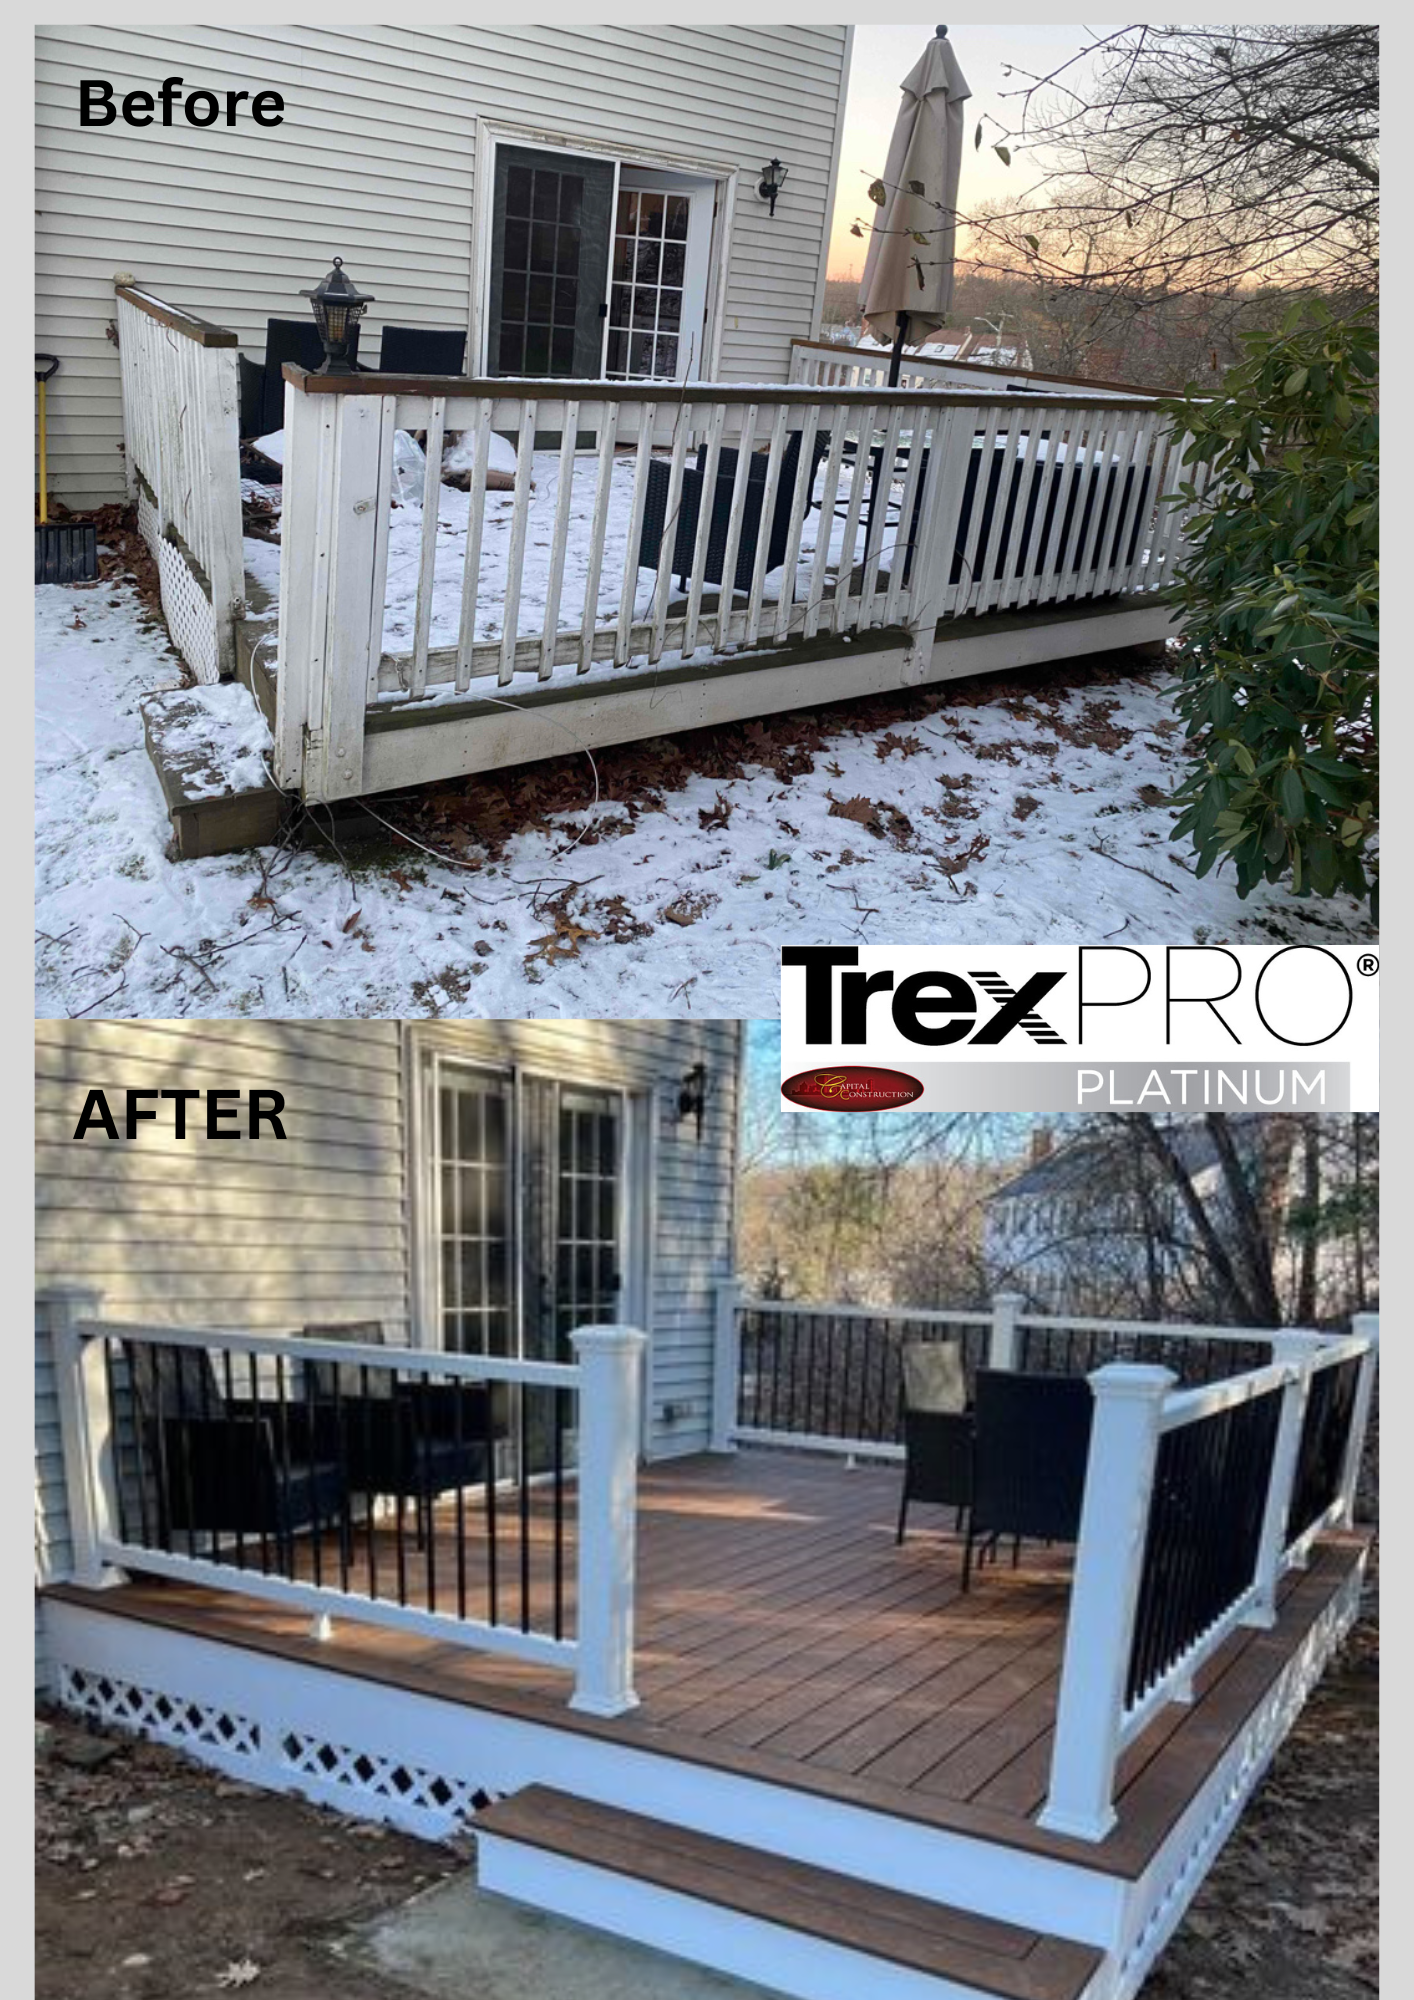 Before and after of a Trex deck installation job in Wrentham, MA